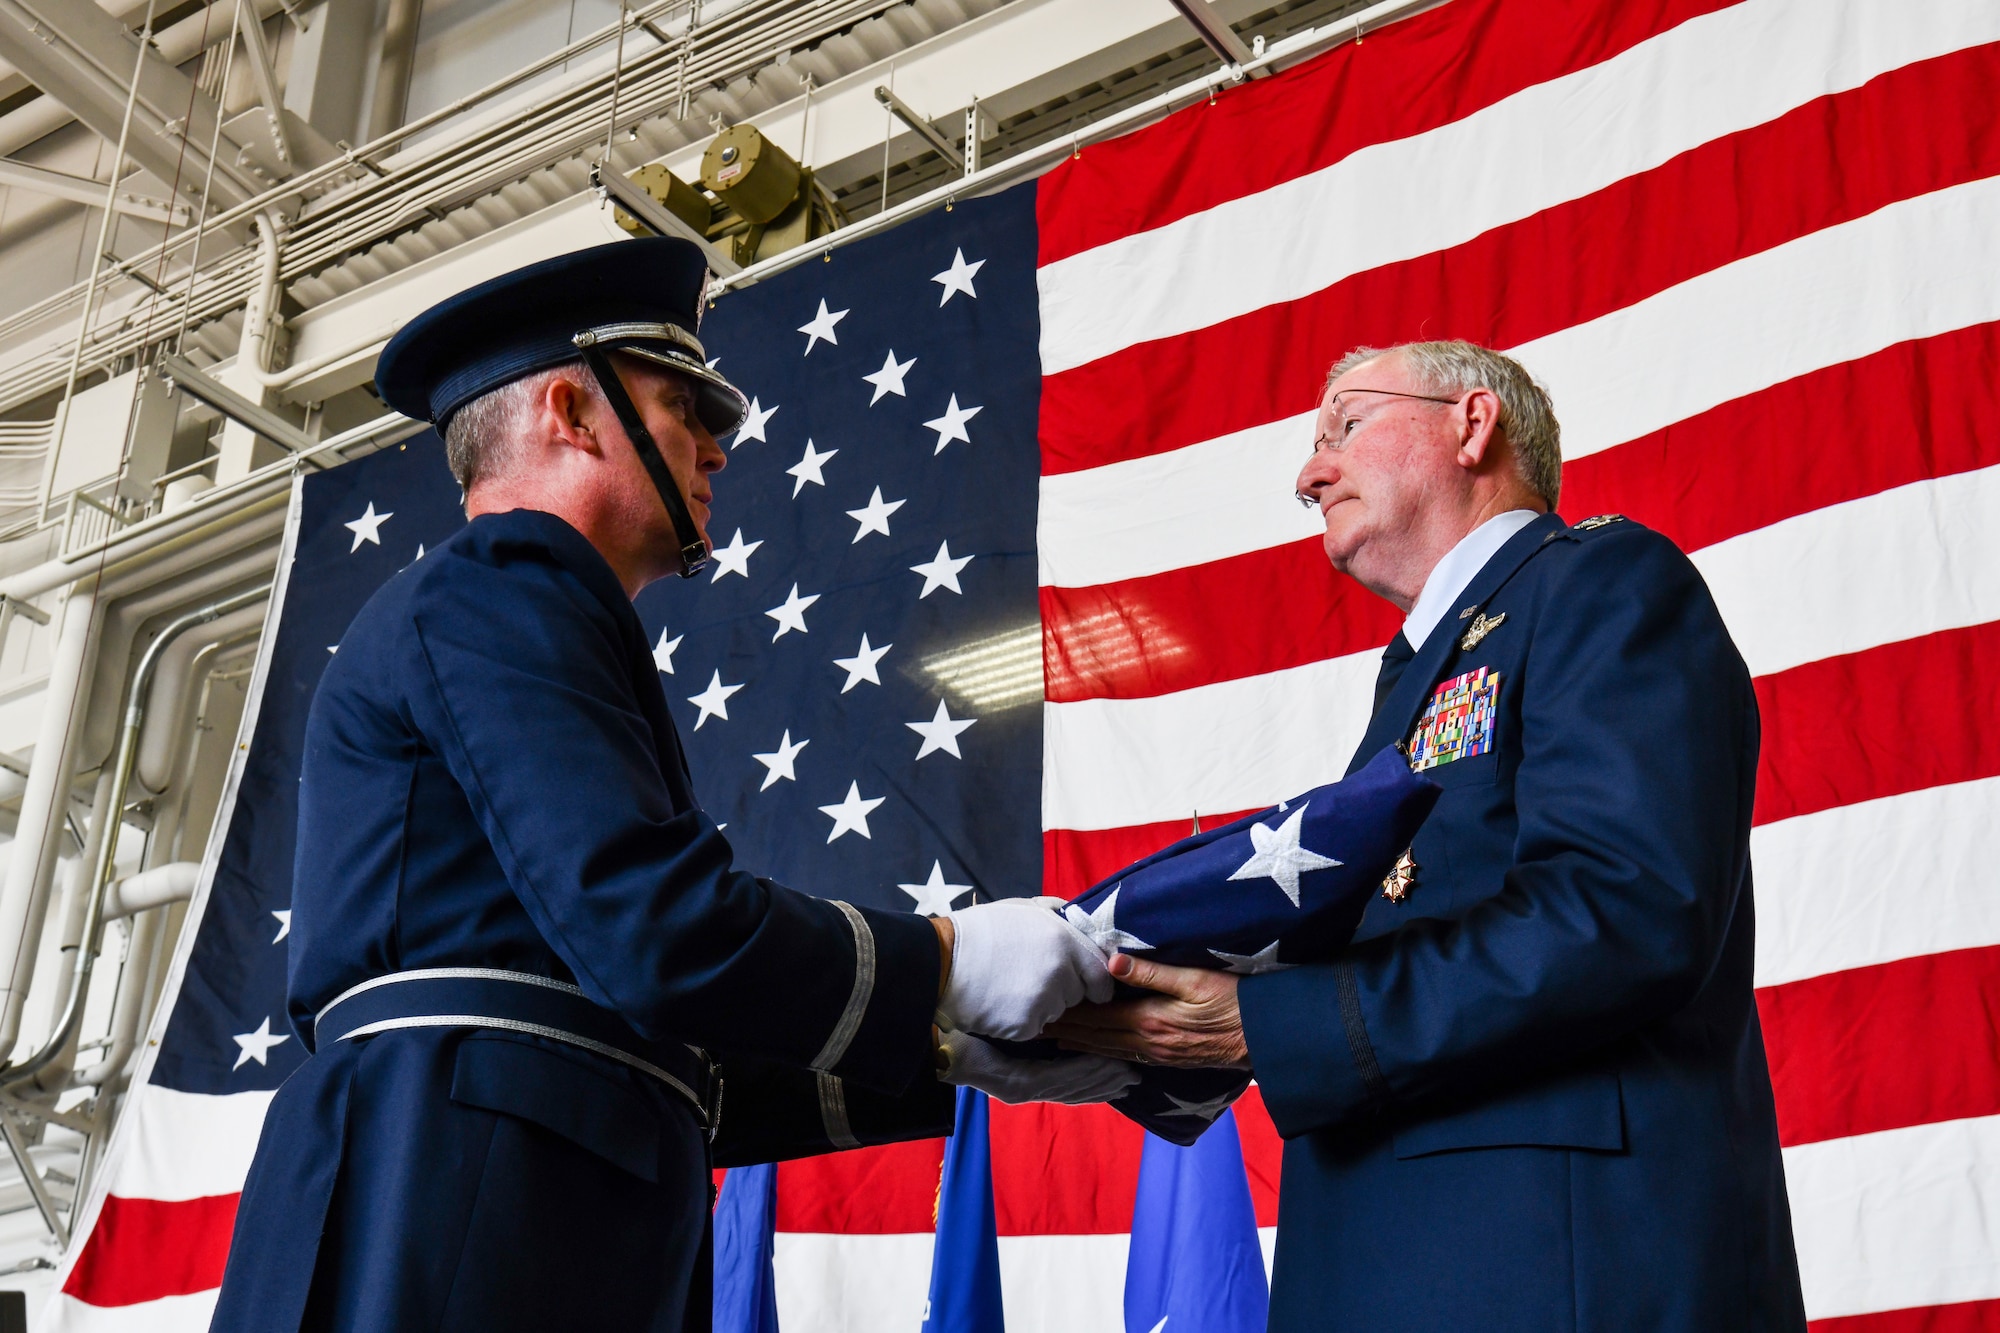 Lt. Col. Scott Allen, an honor guardsman assigned to the 910th Airlift Wing, presents a flag to Col. Jeff Van Dootingh, the commander of the 910th AW, May 6, 2023, at Youngstown Air Reserve Station, Ohio.